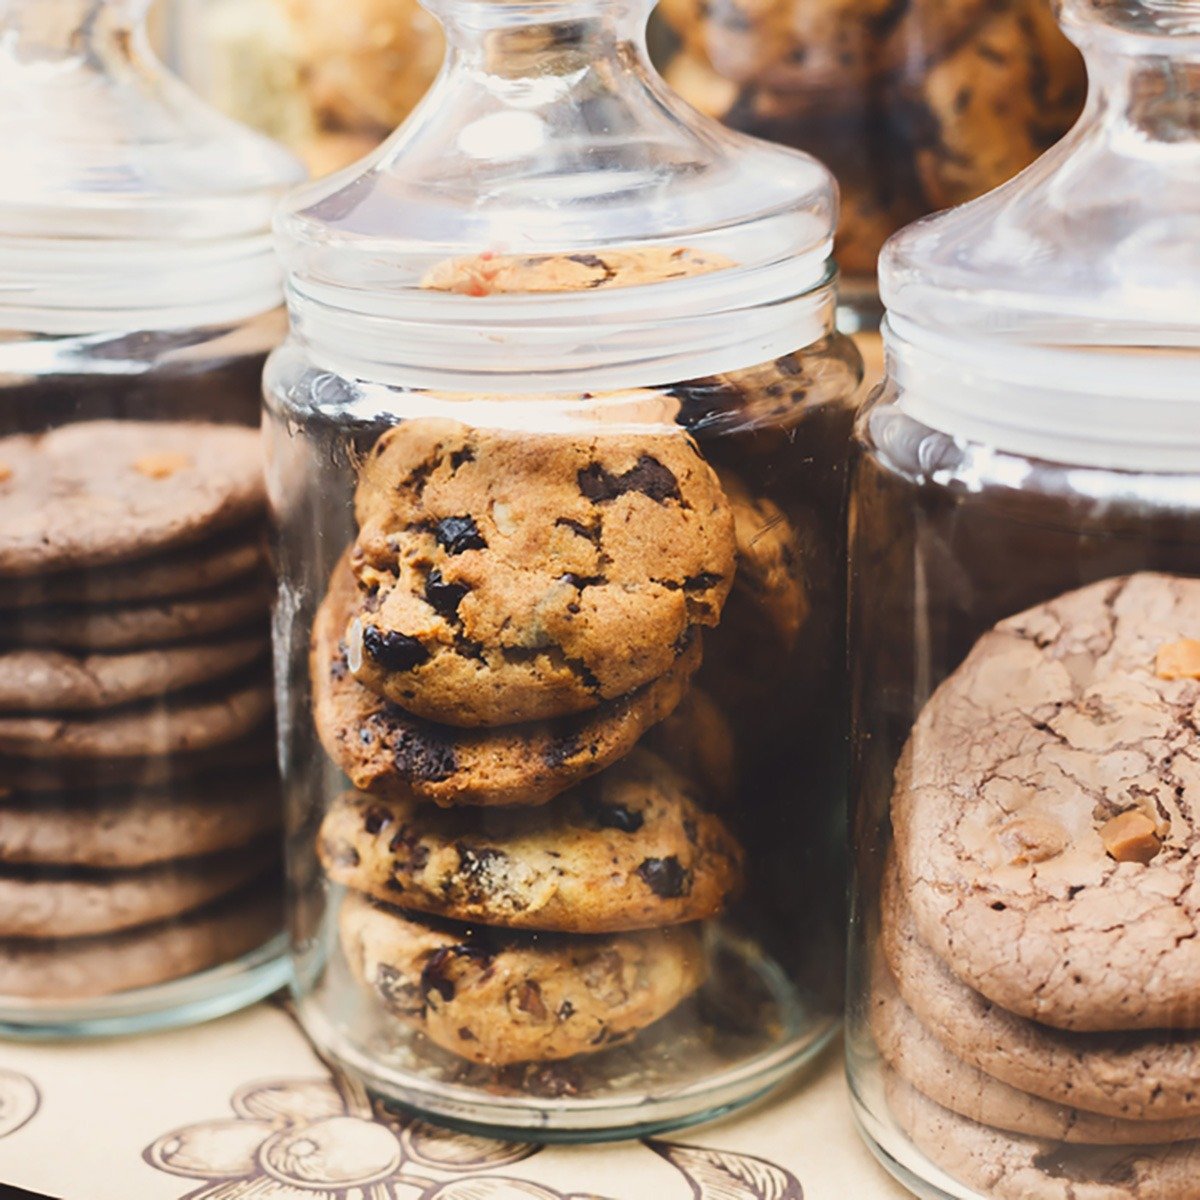 How To Store Cookies So They Stay Fresh Until Christmas